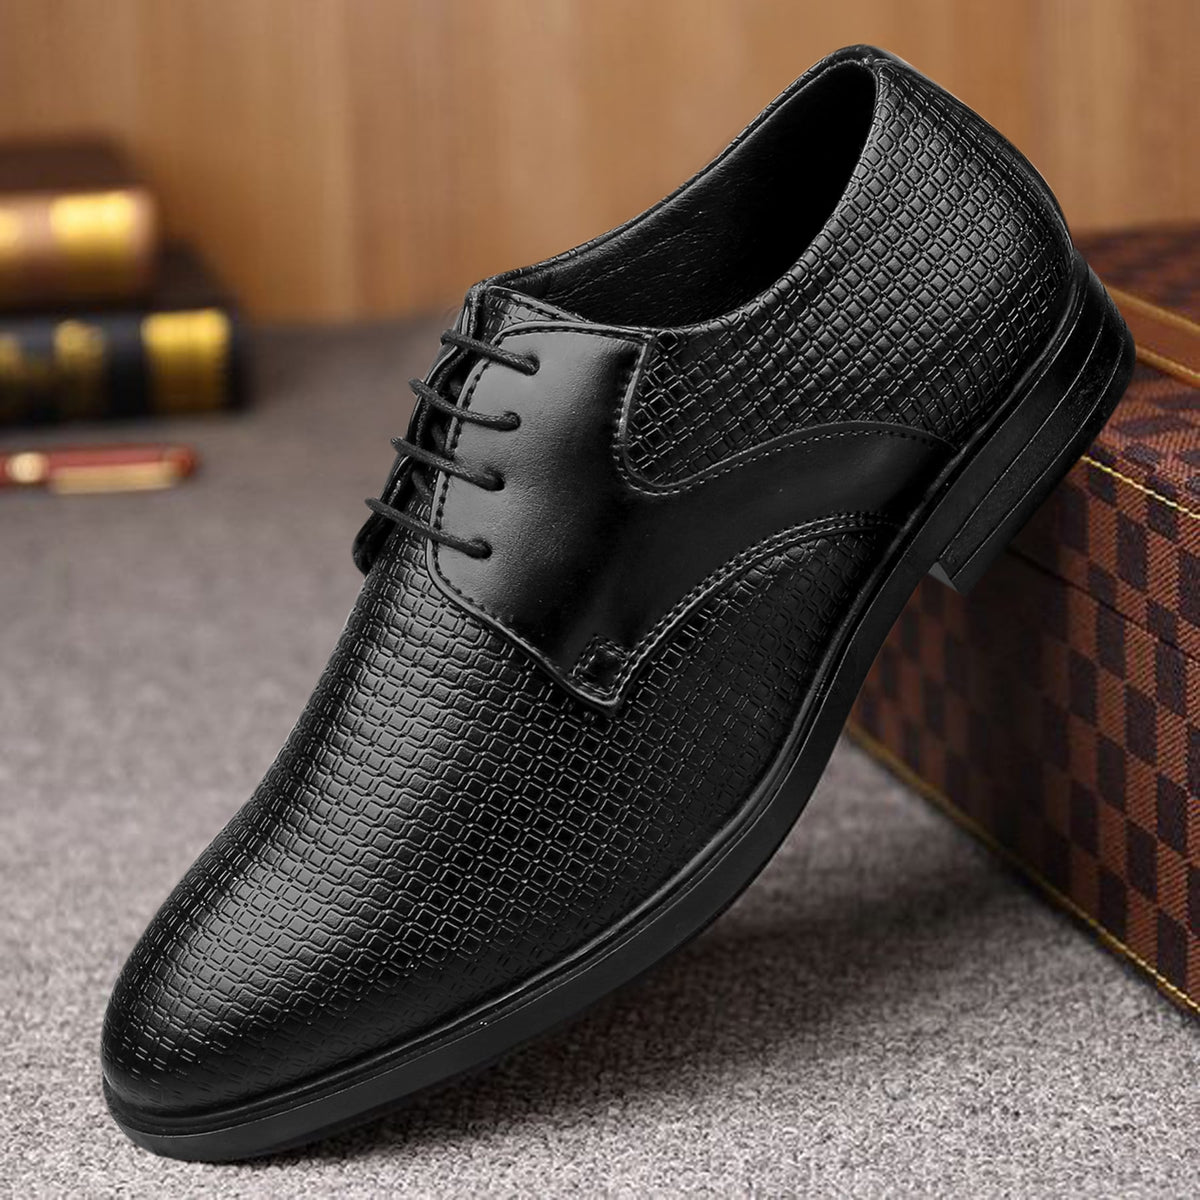 Bacca Bucci OSLO Formal Shoes with Superior Comfort |  All Day Wear Office Or Party Lace-up Shoes